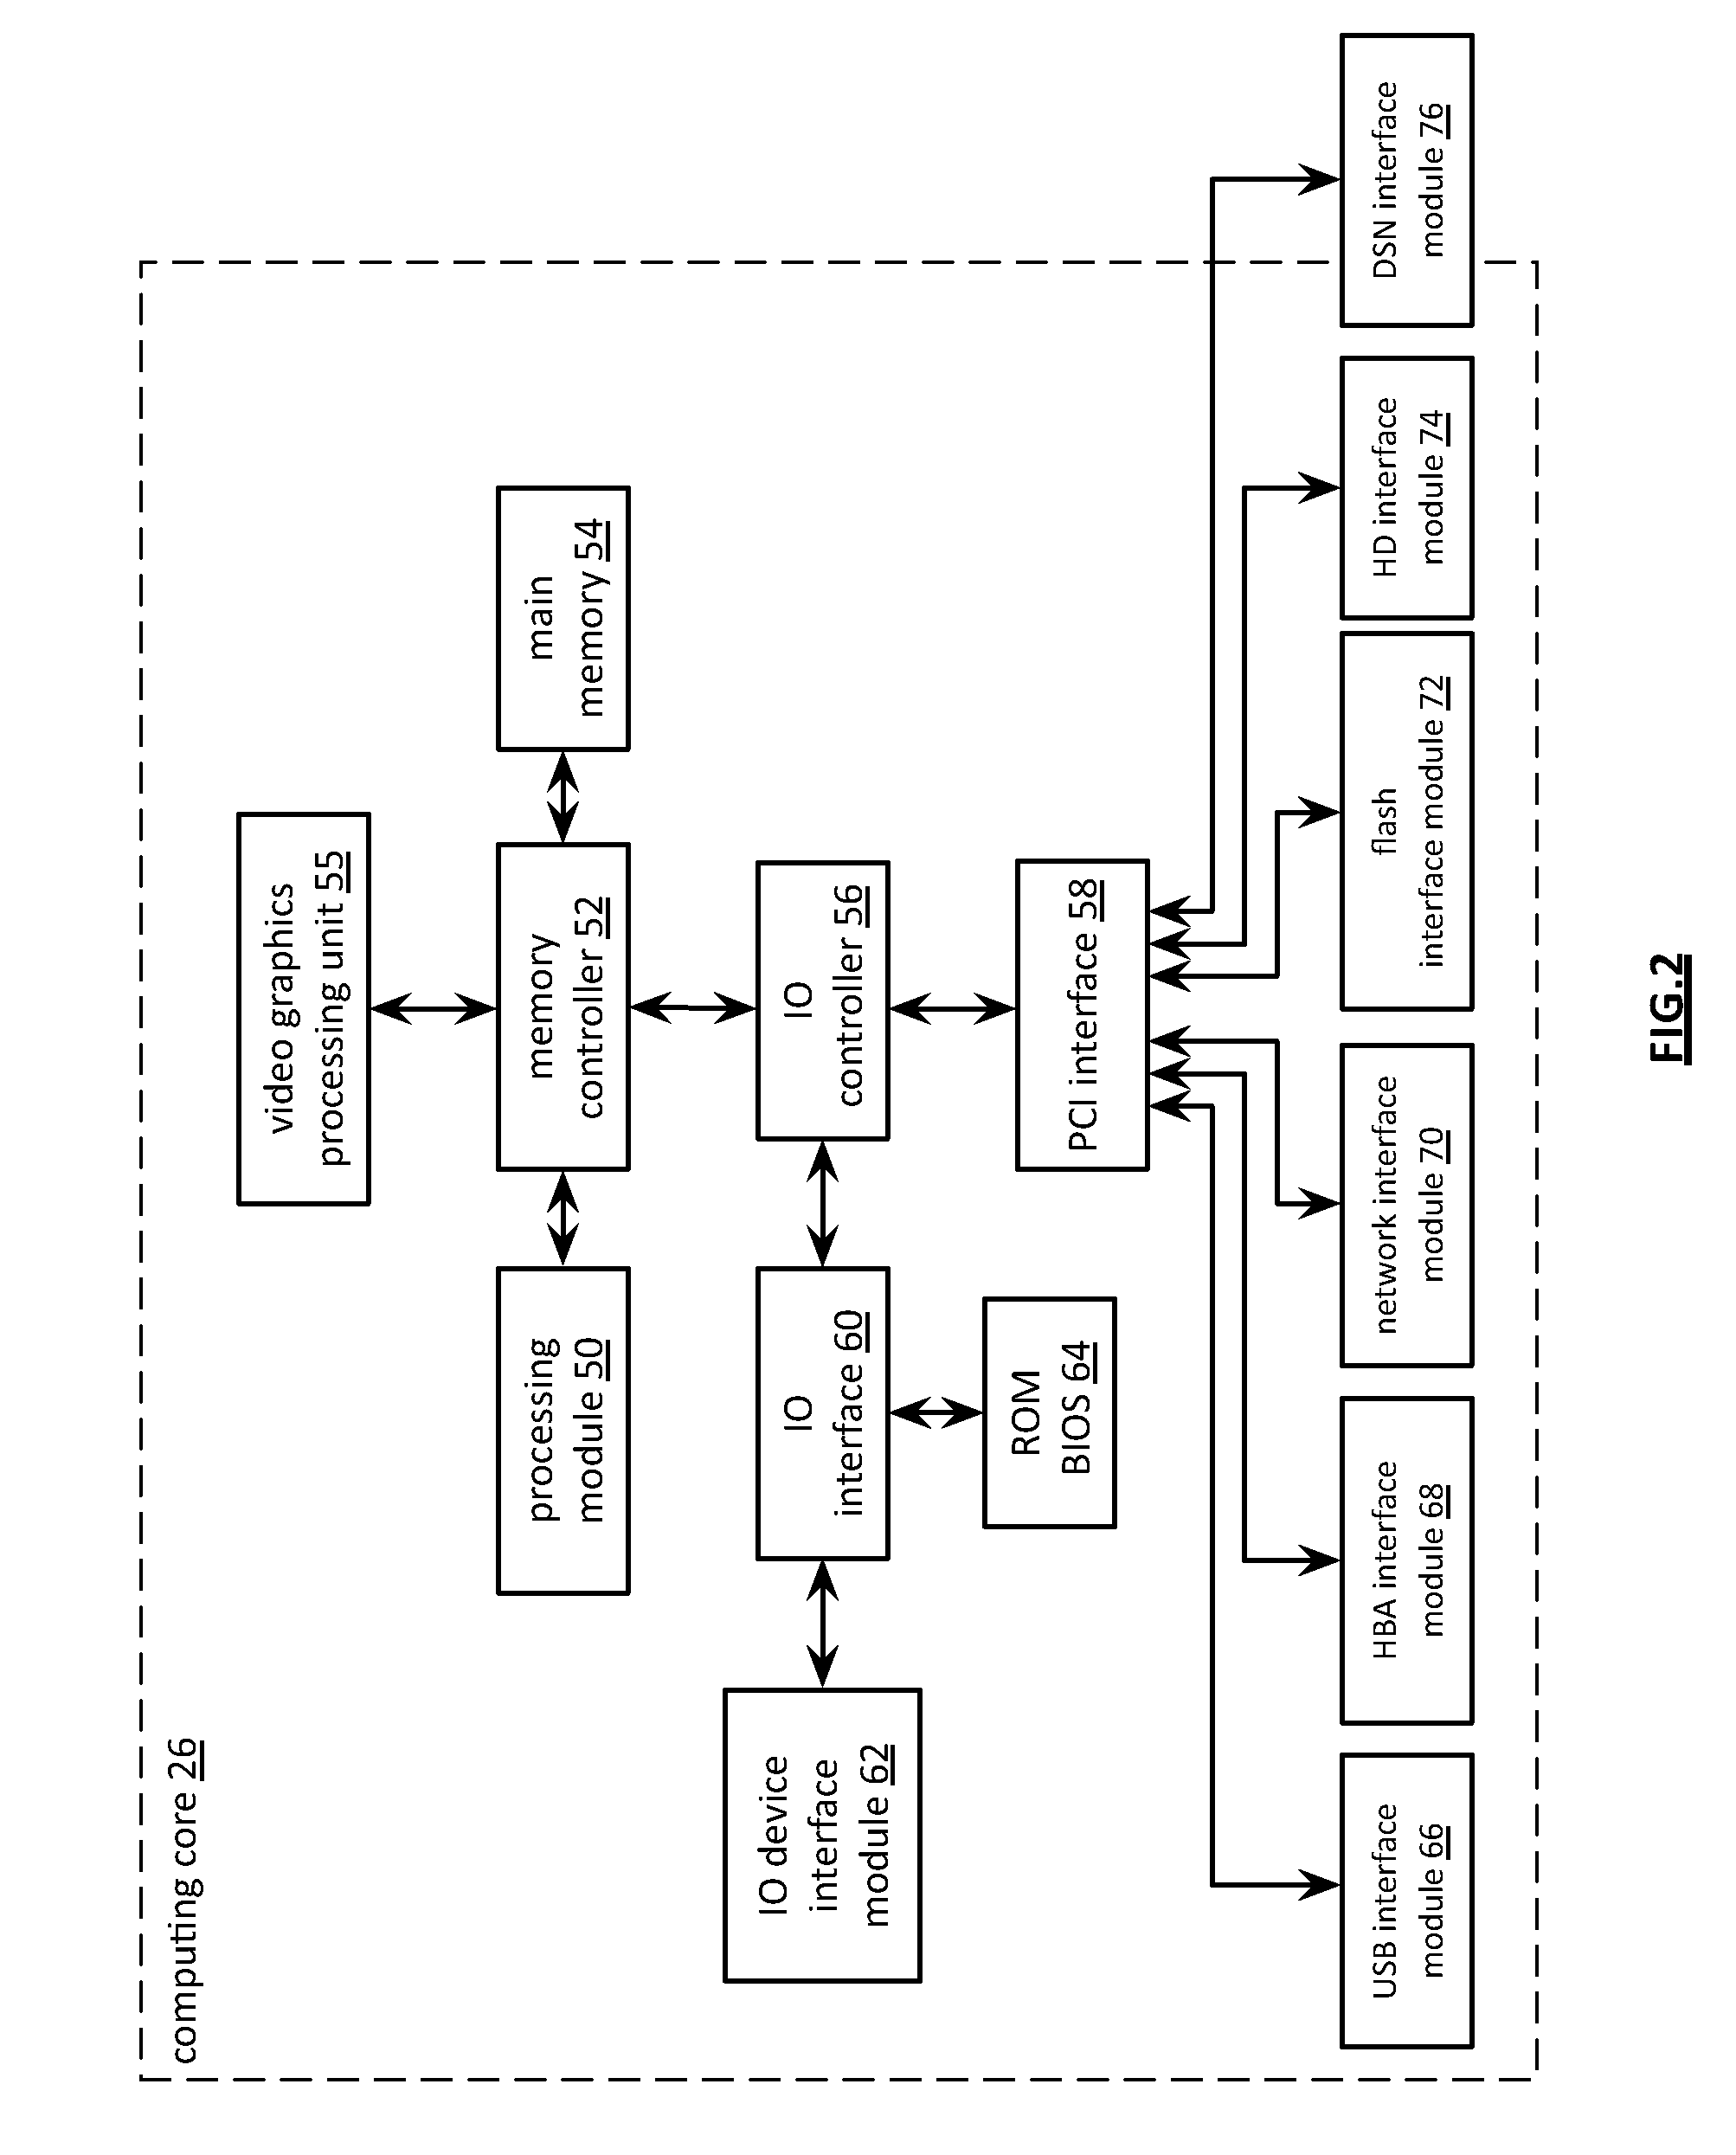 Retrieving data from a dispersed storage network in accordance with a retrieval threshold